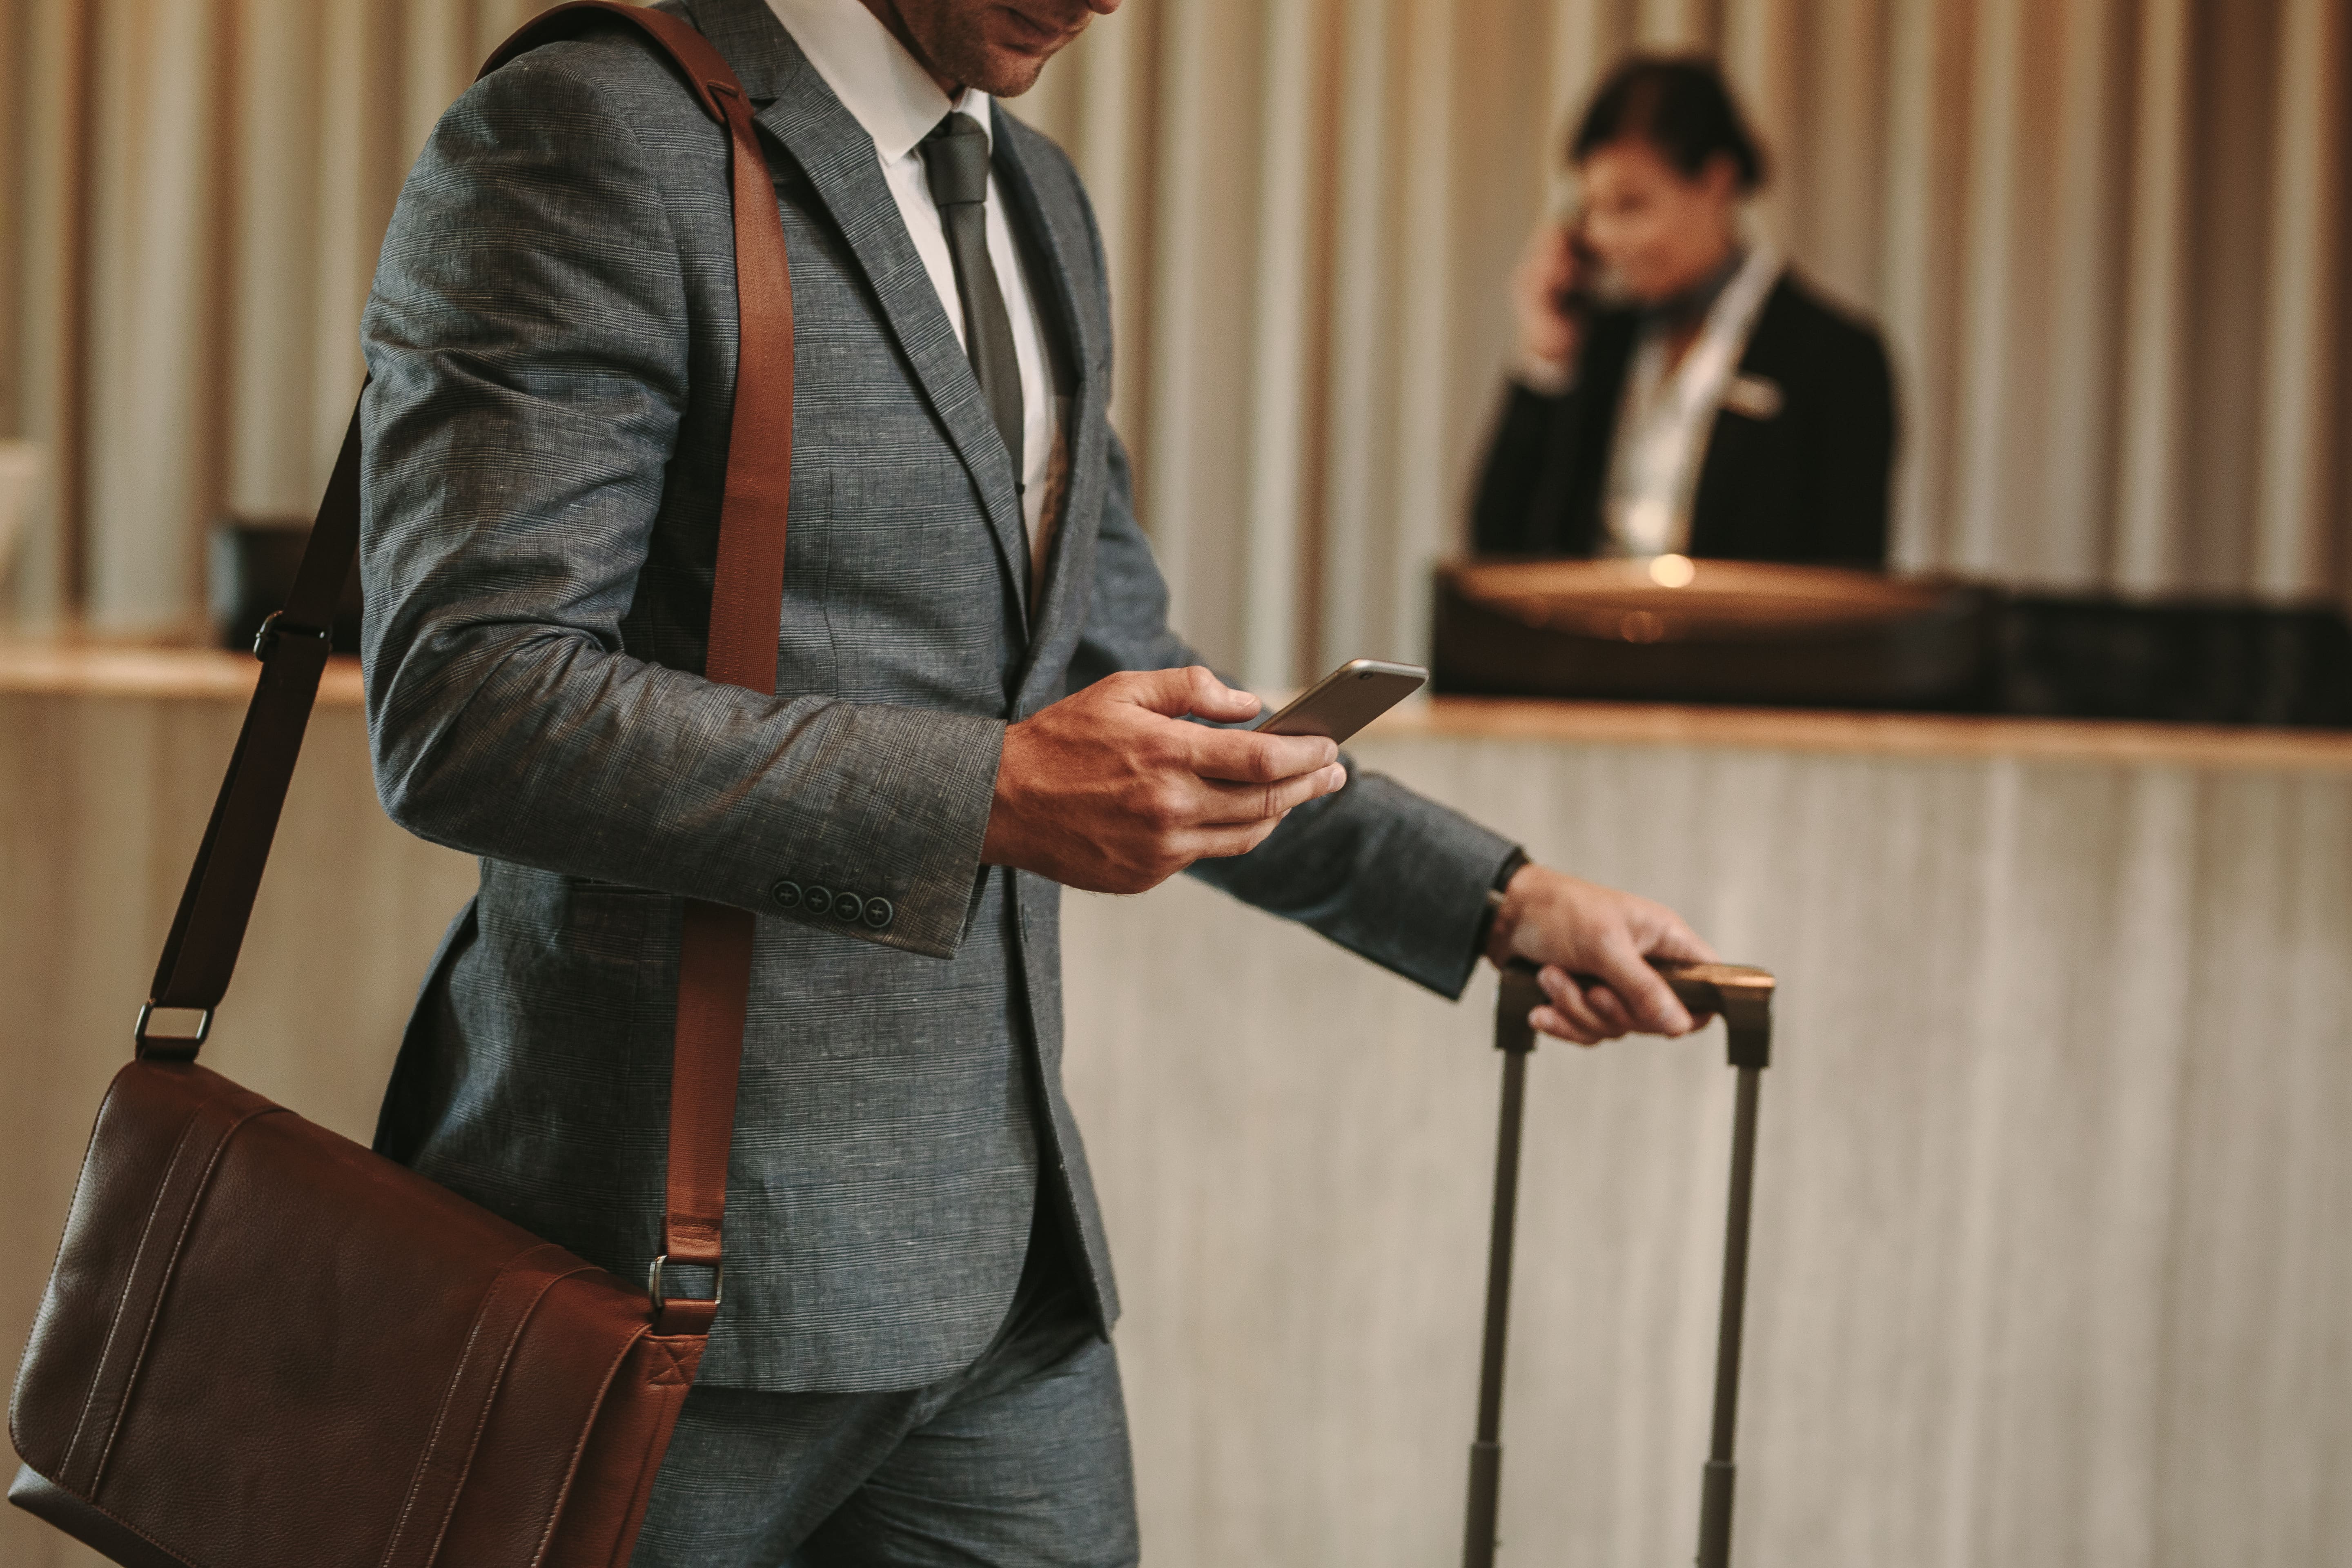 Business tourism has changed – Make sure your hotel is ready!